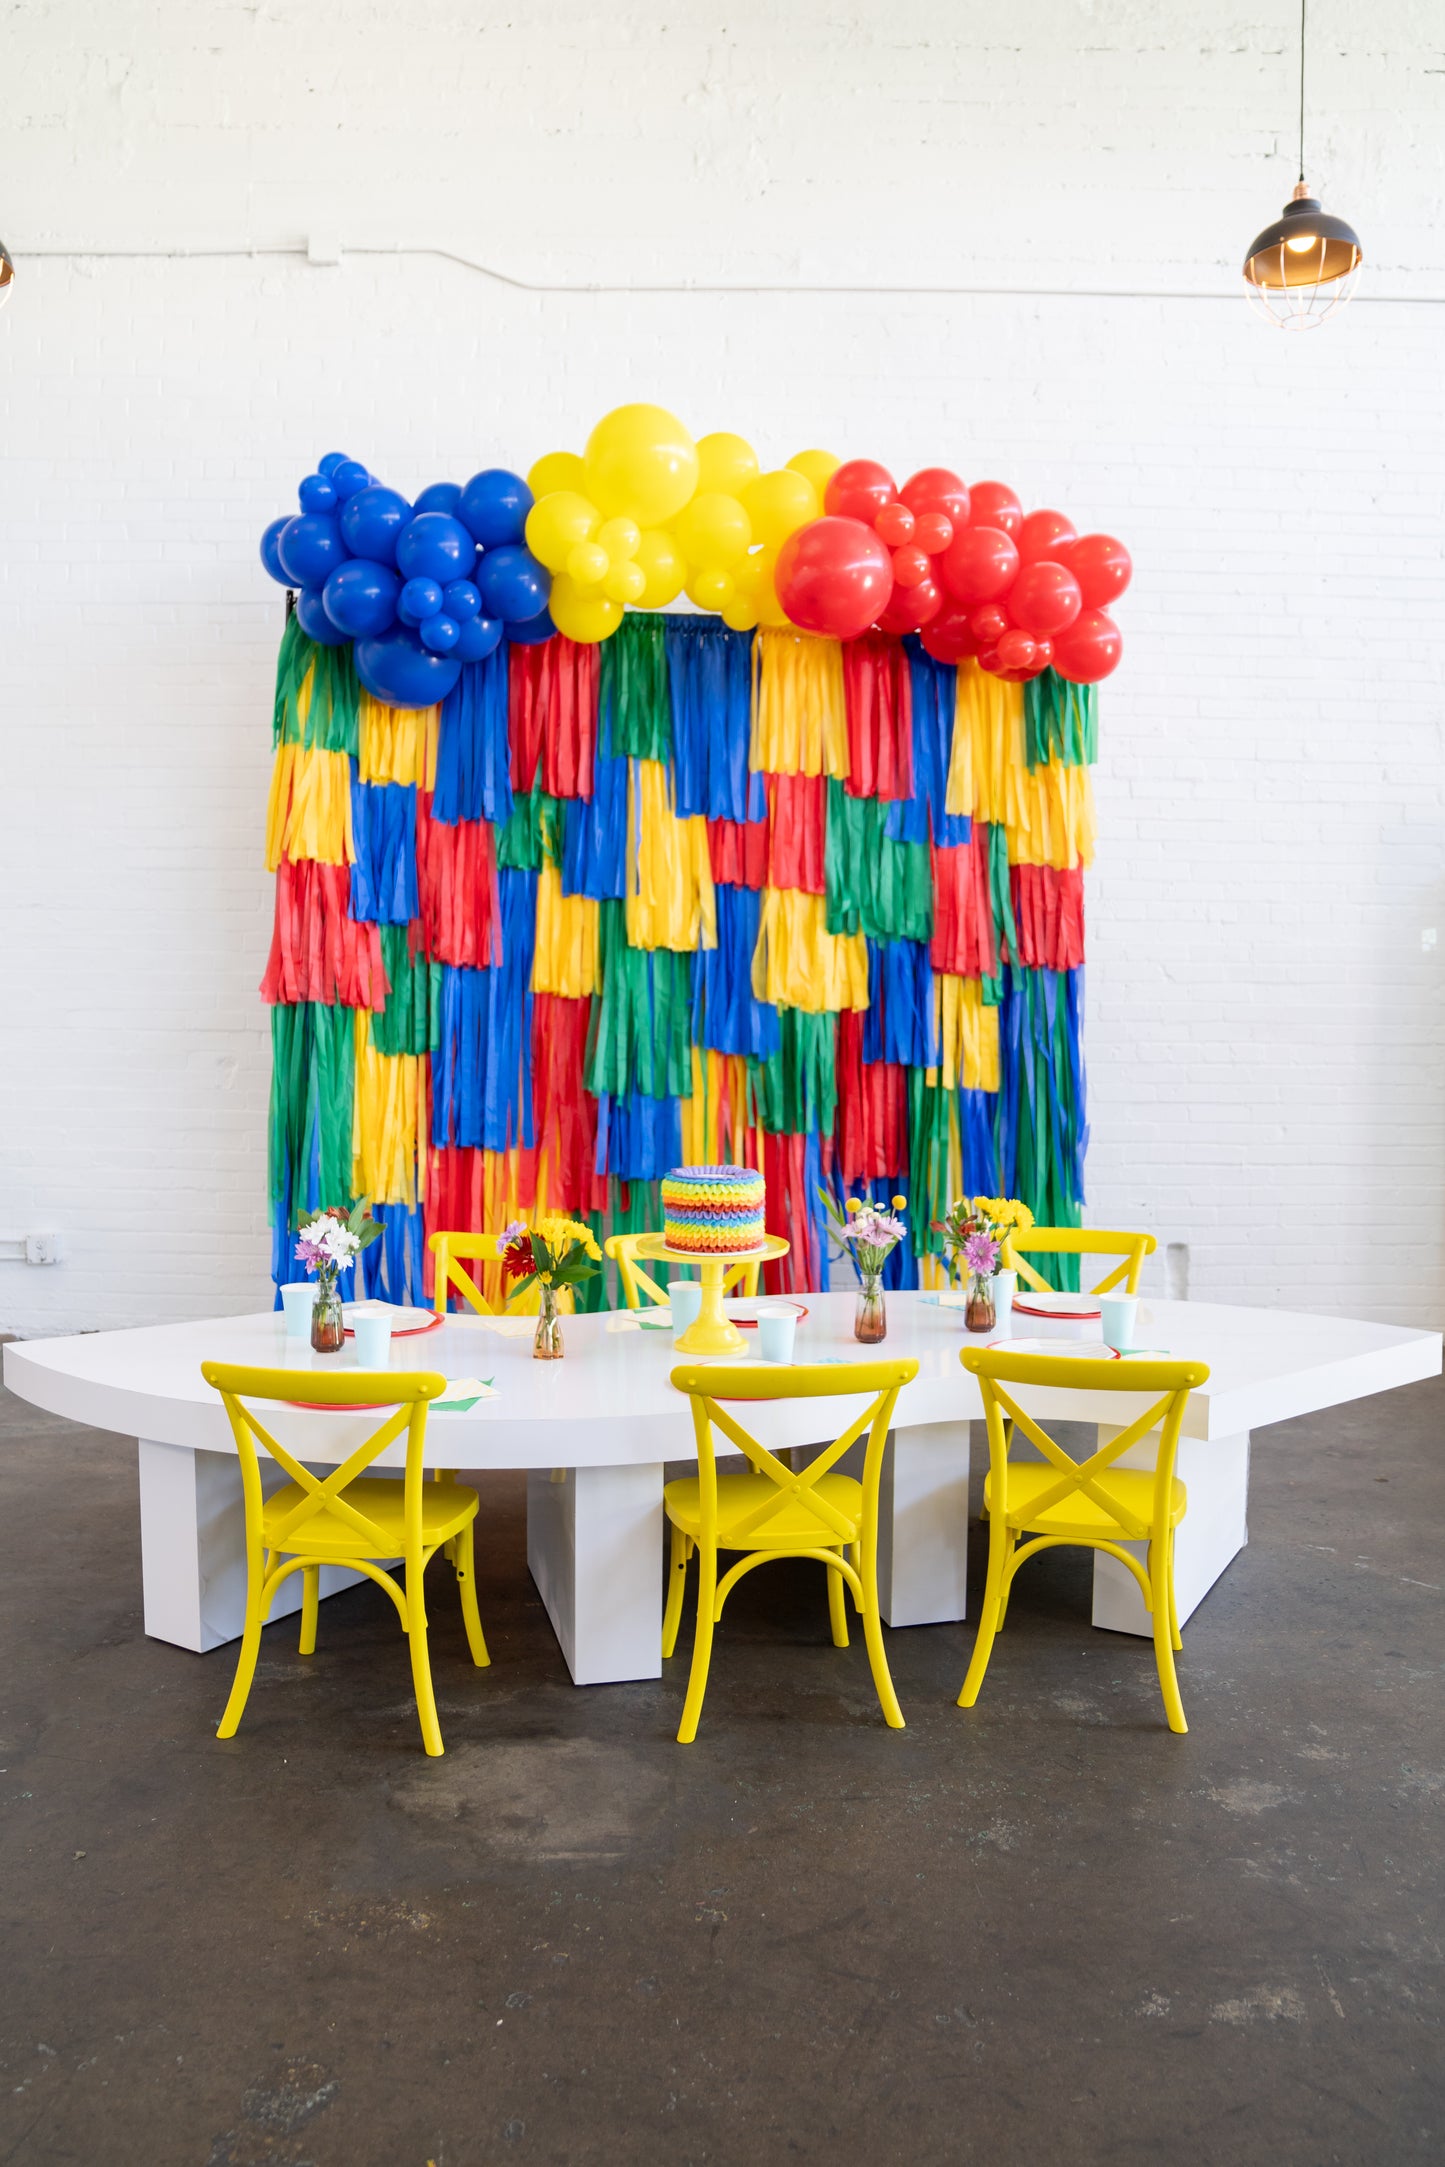 Primary Colors/LEGO Balloon Garland